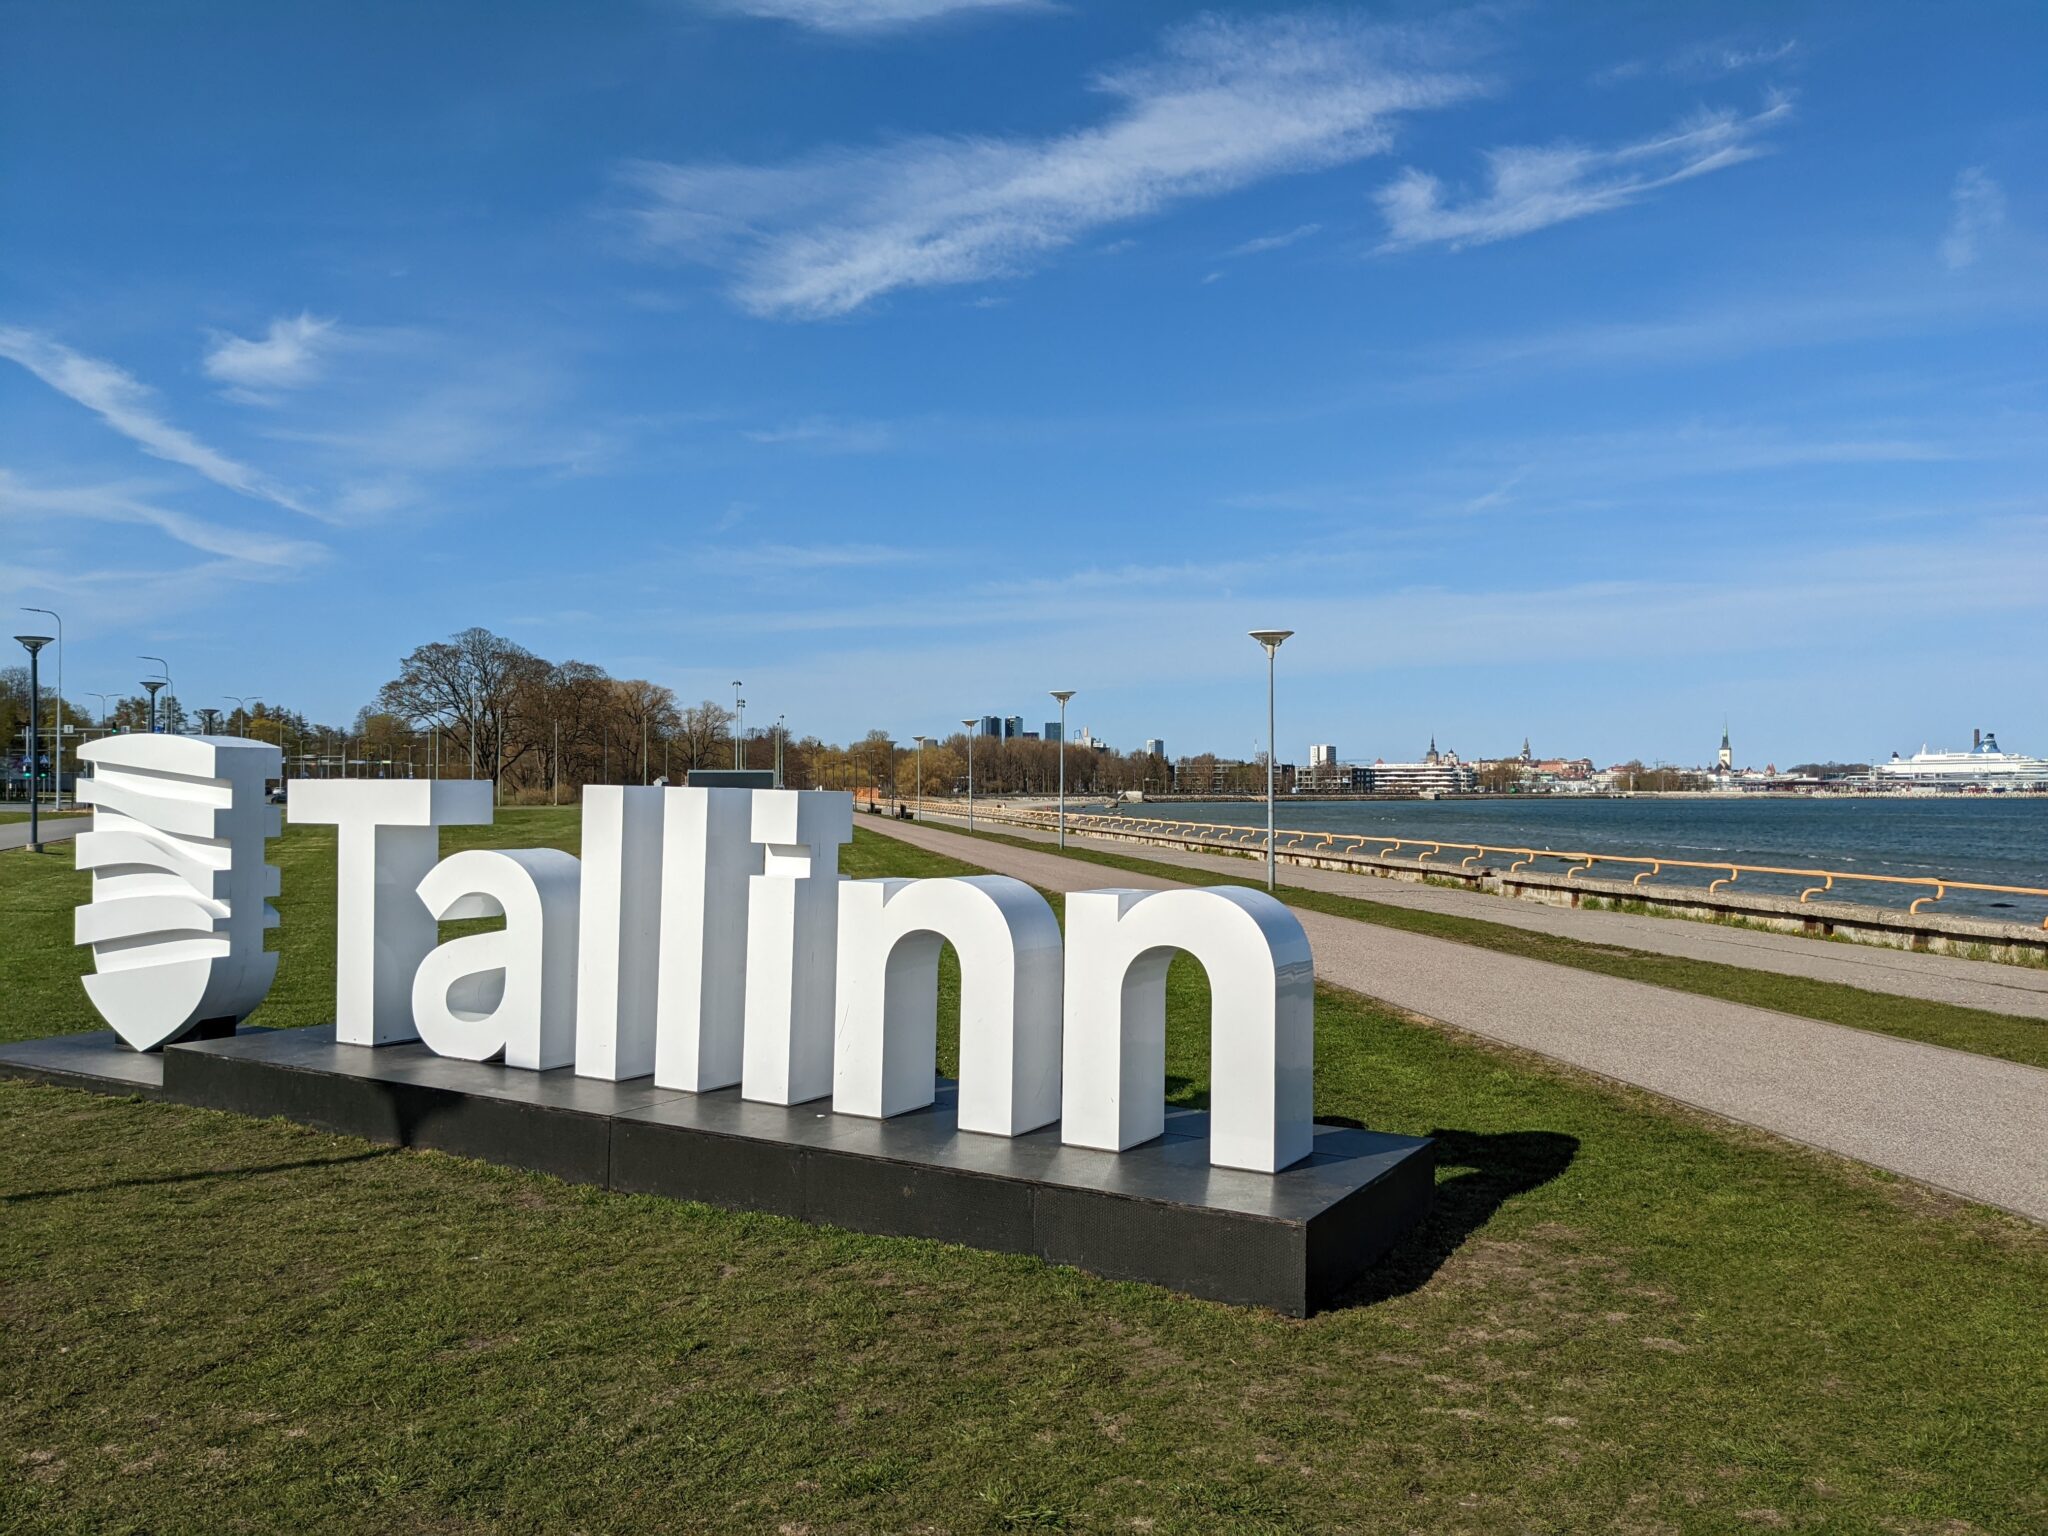 A white sculpture that spells out the name "Tallinn" which is the capital of Estonia